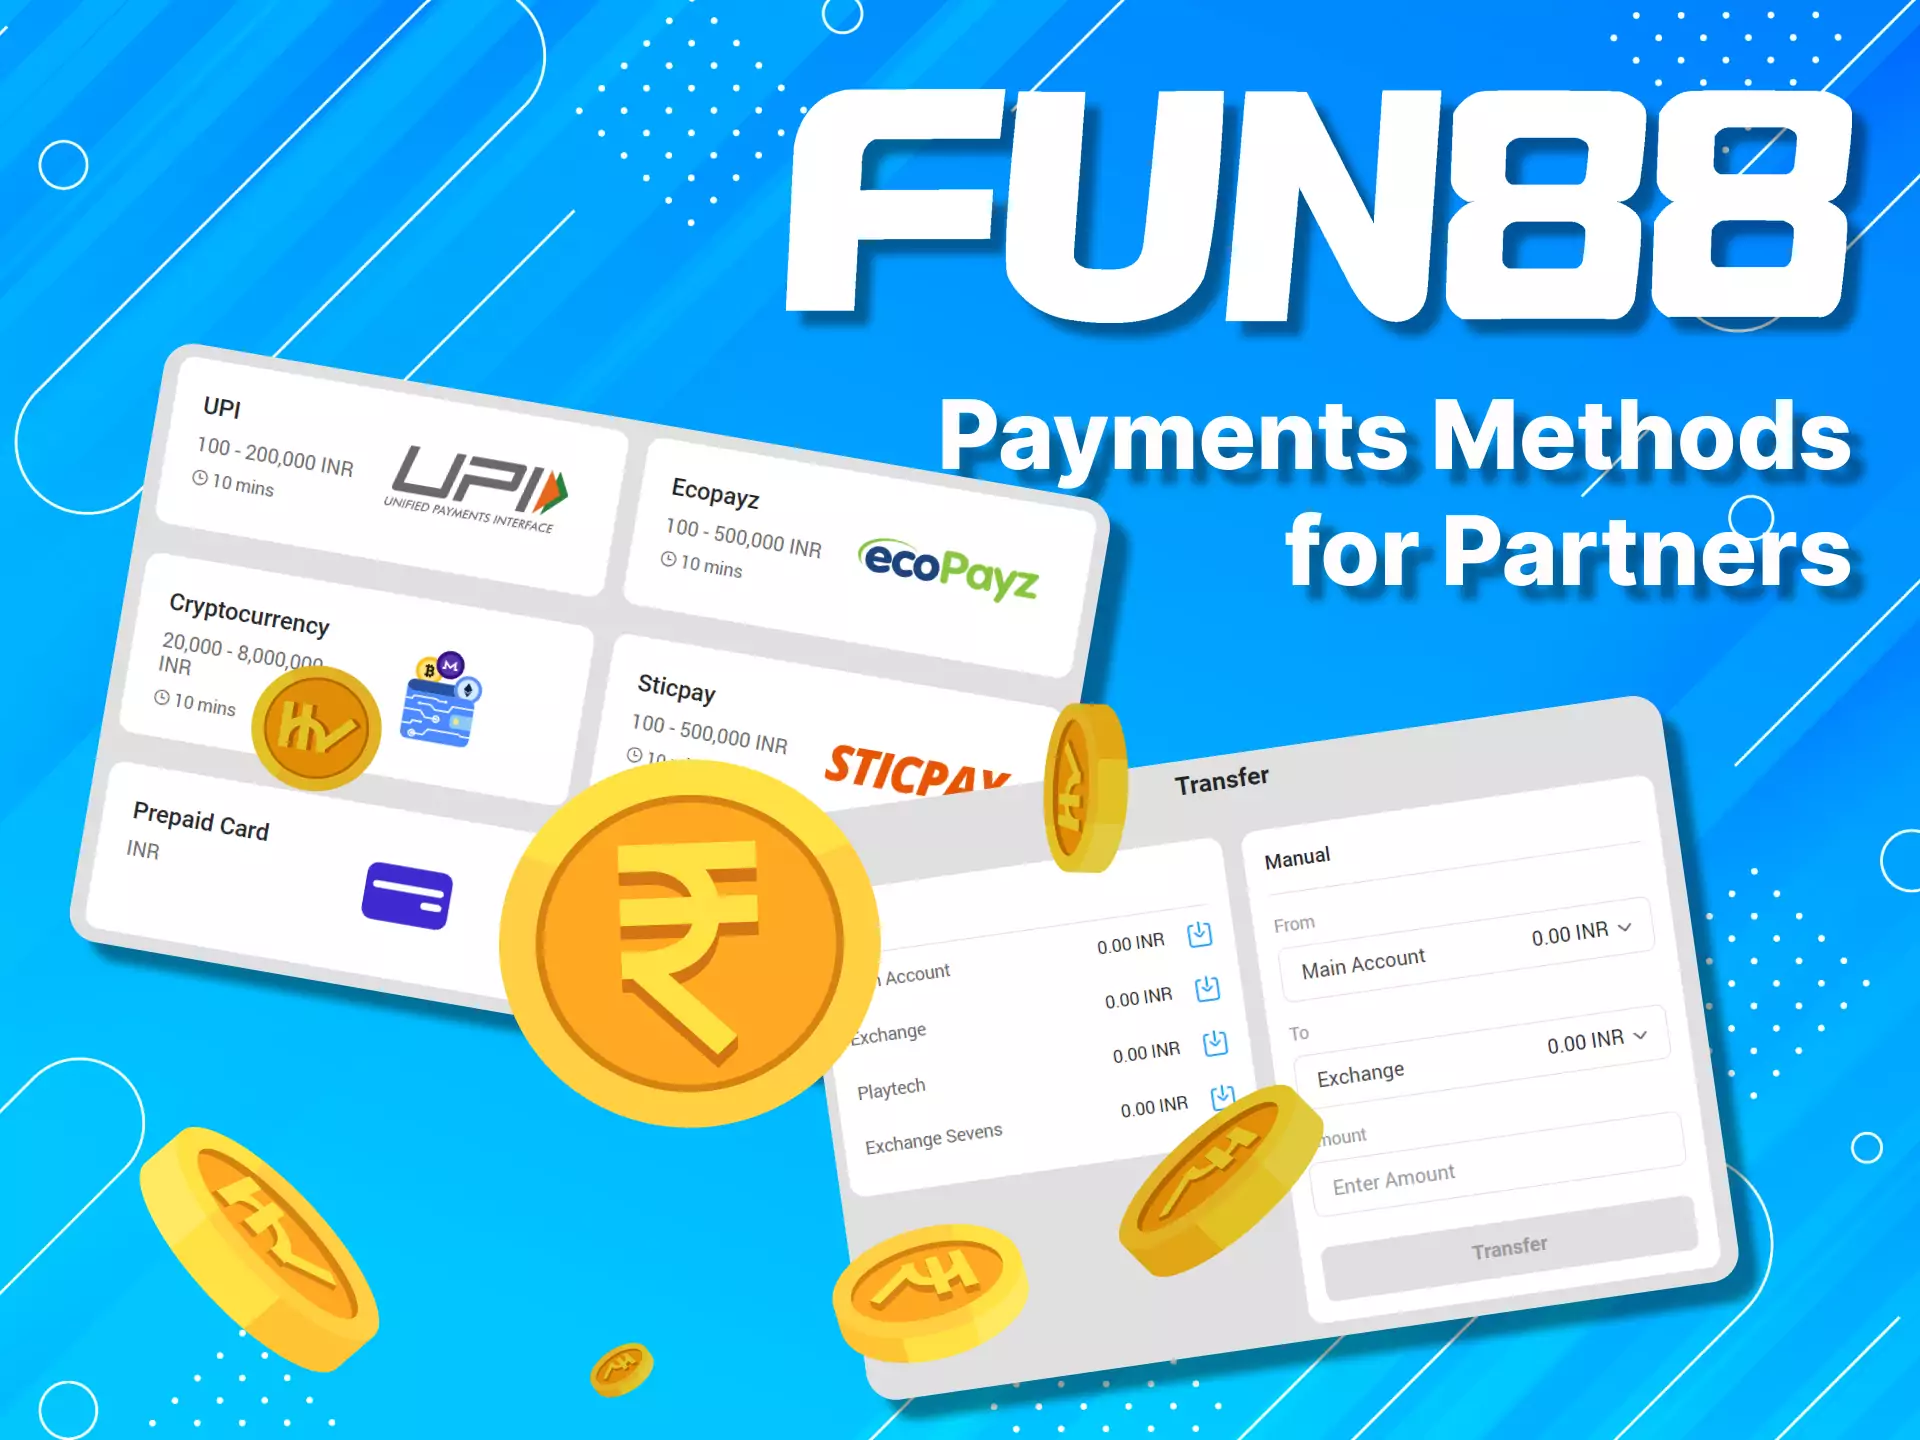 You can withdraw money from Fun88 to your e-wallet.